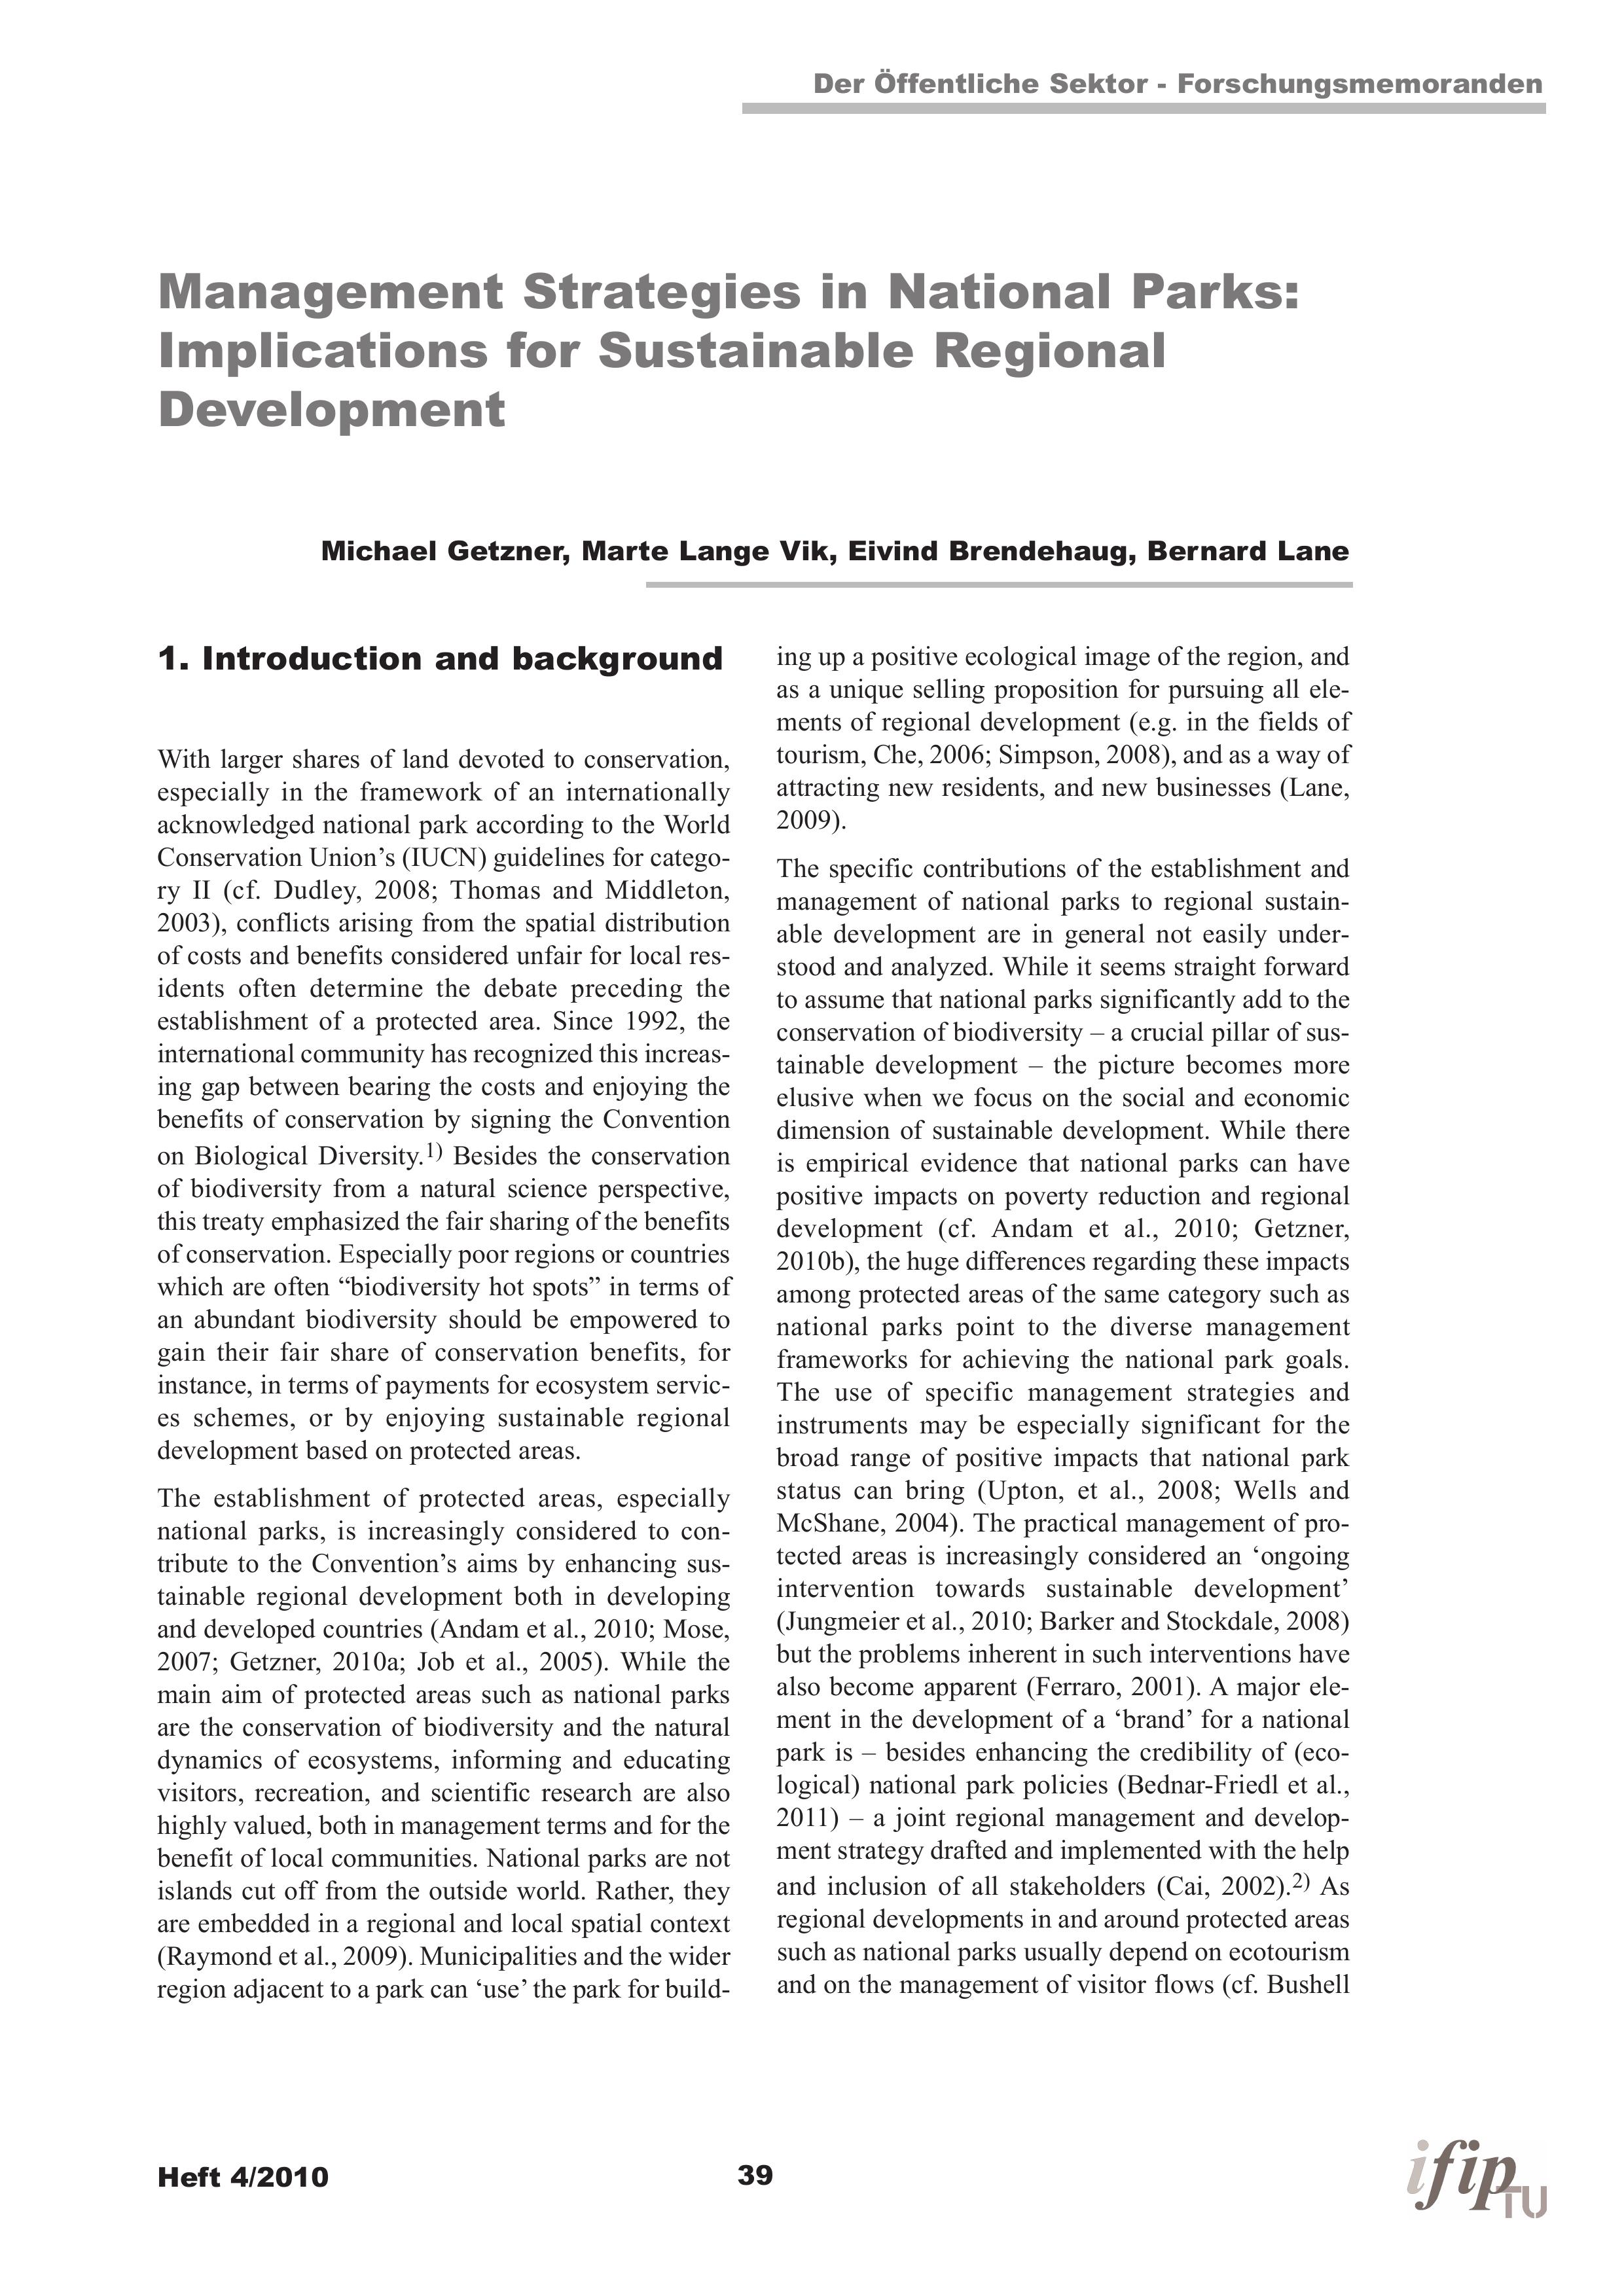 Management strategies in national parks: implications for sustainable regional development